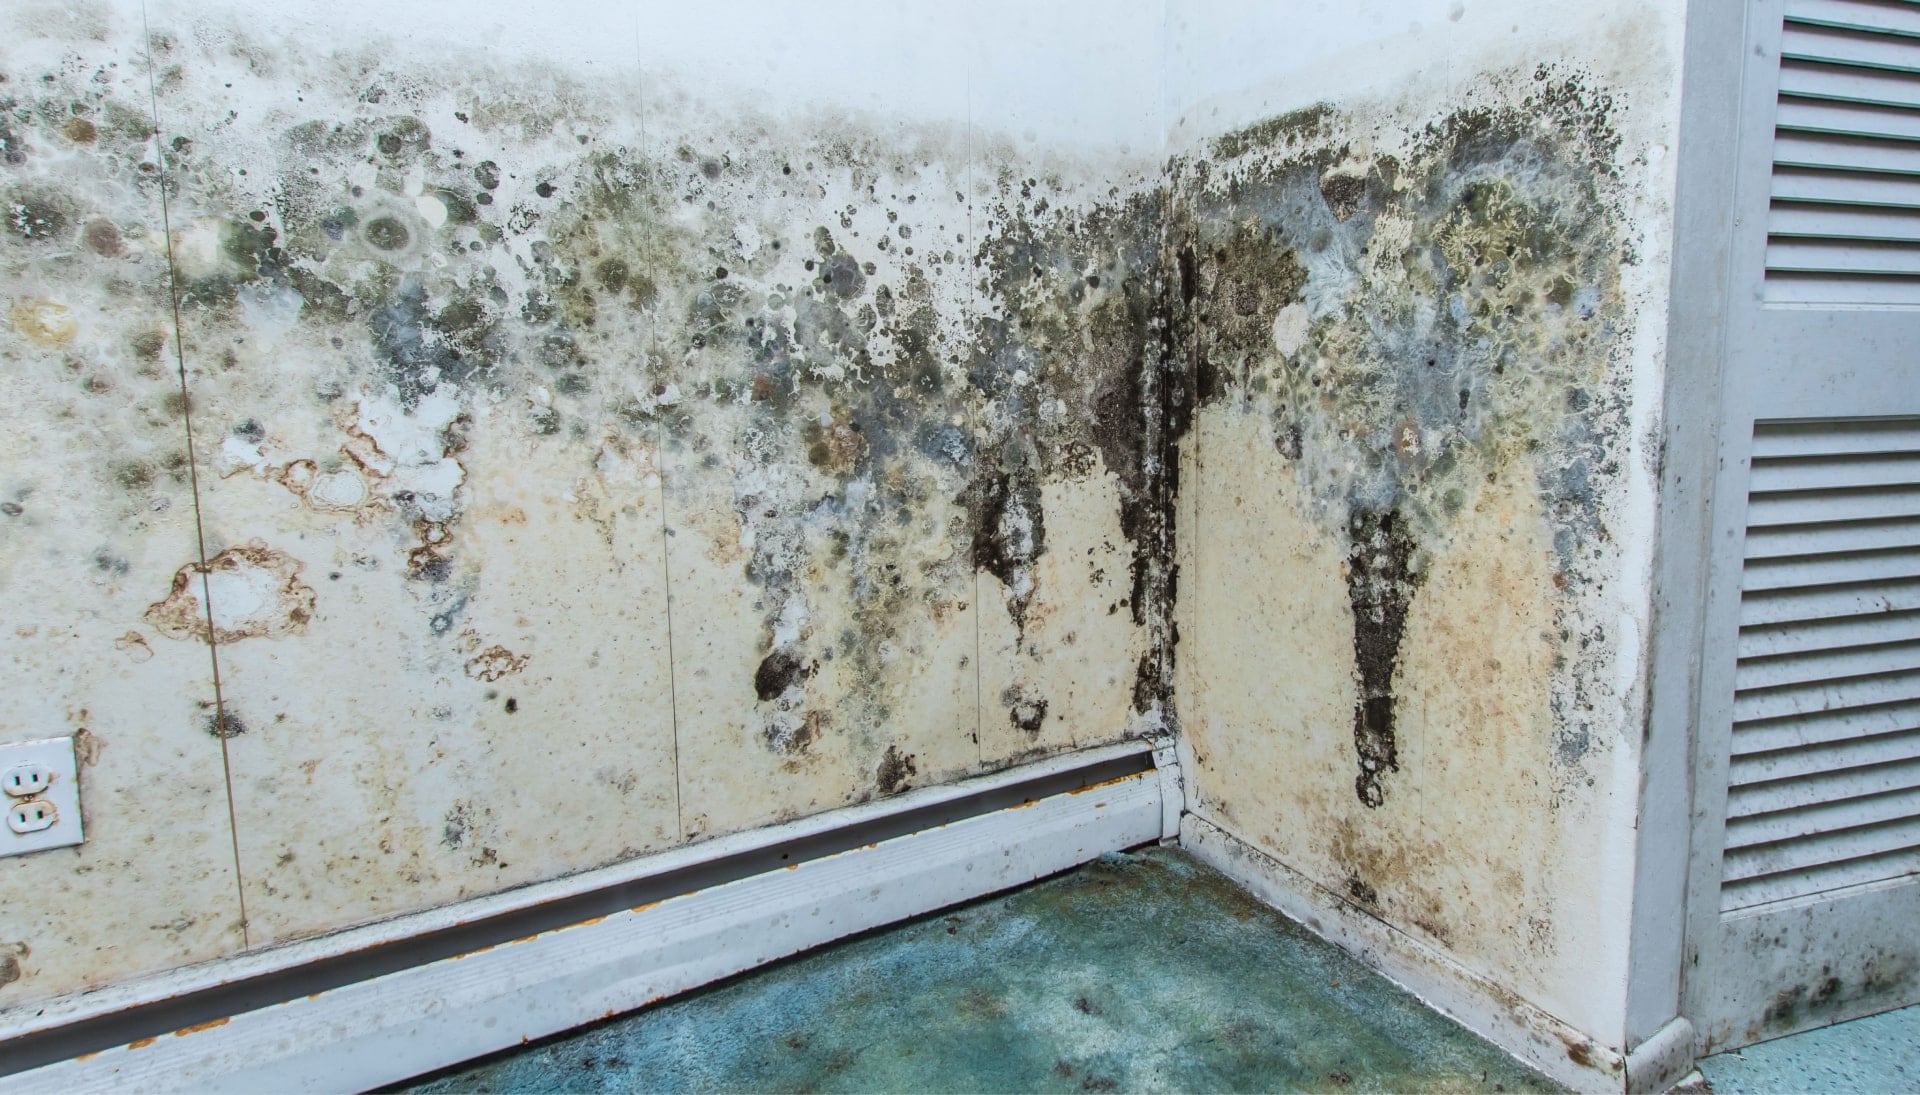 Mold-Damager-Odor-Control in Raleigh